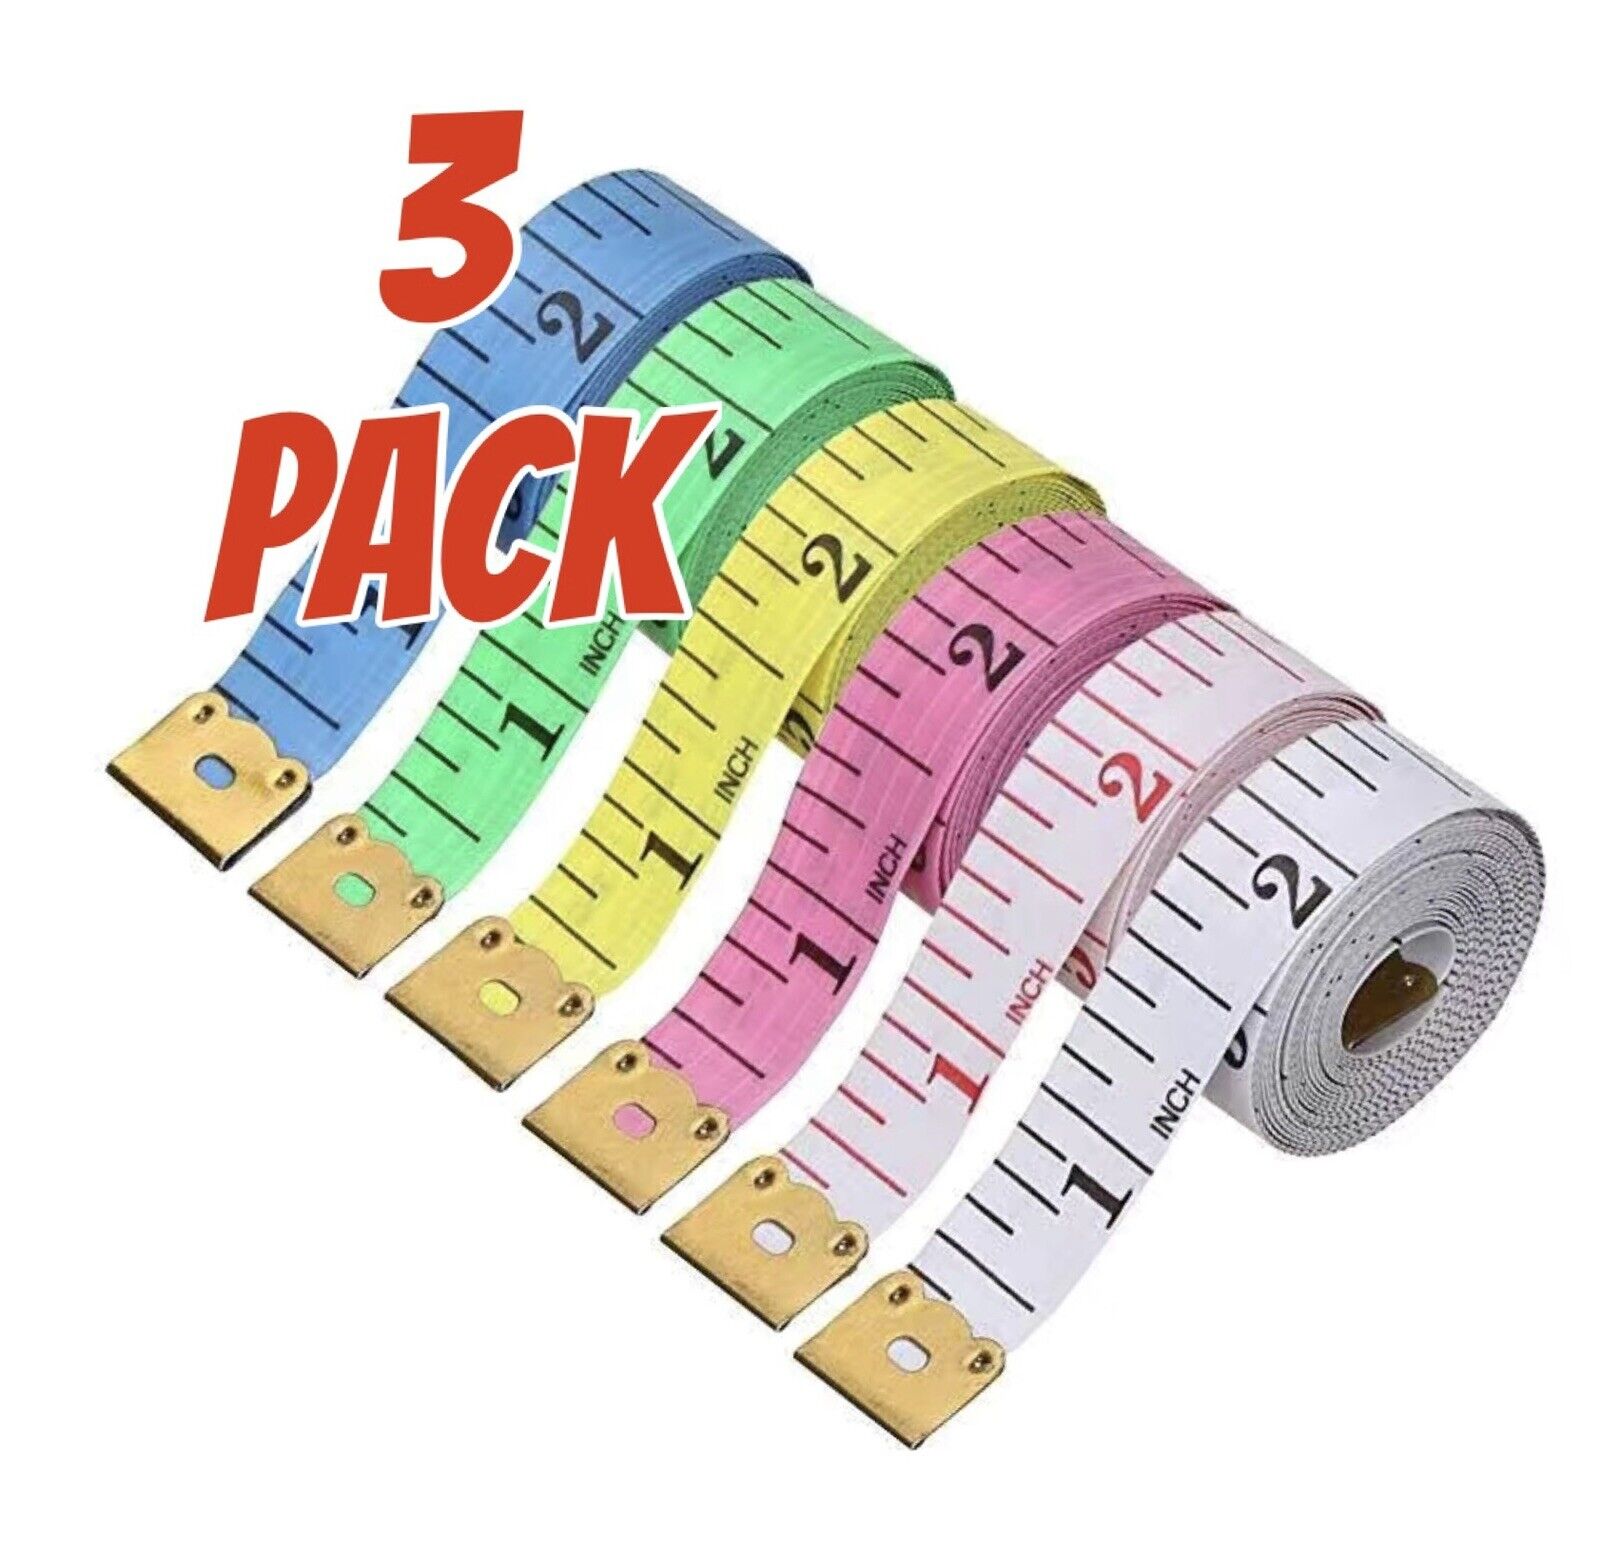 3-Pack Body Measuring Tape Ruler Sewing Cloth Tailor Measure 60 inch 150 cm